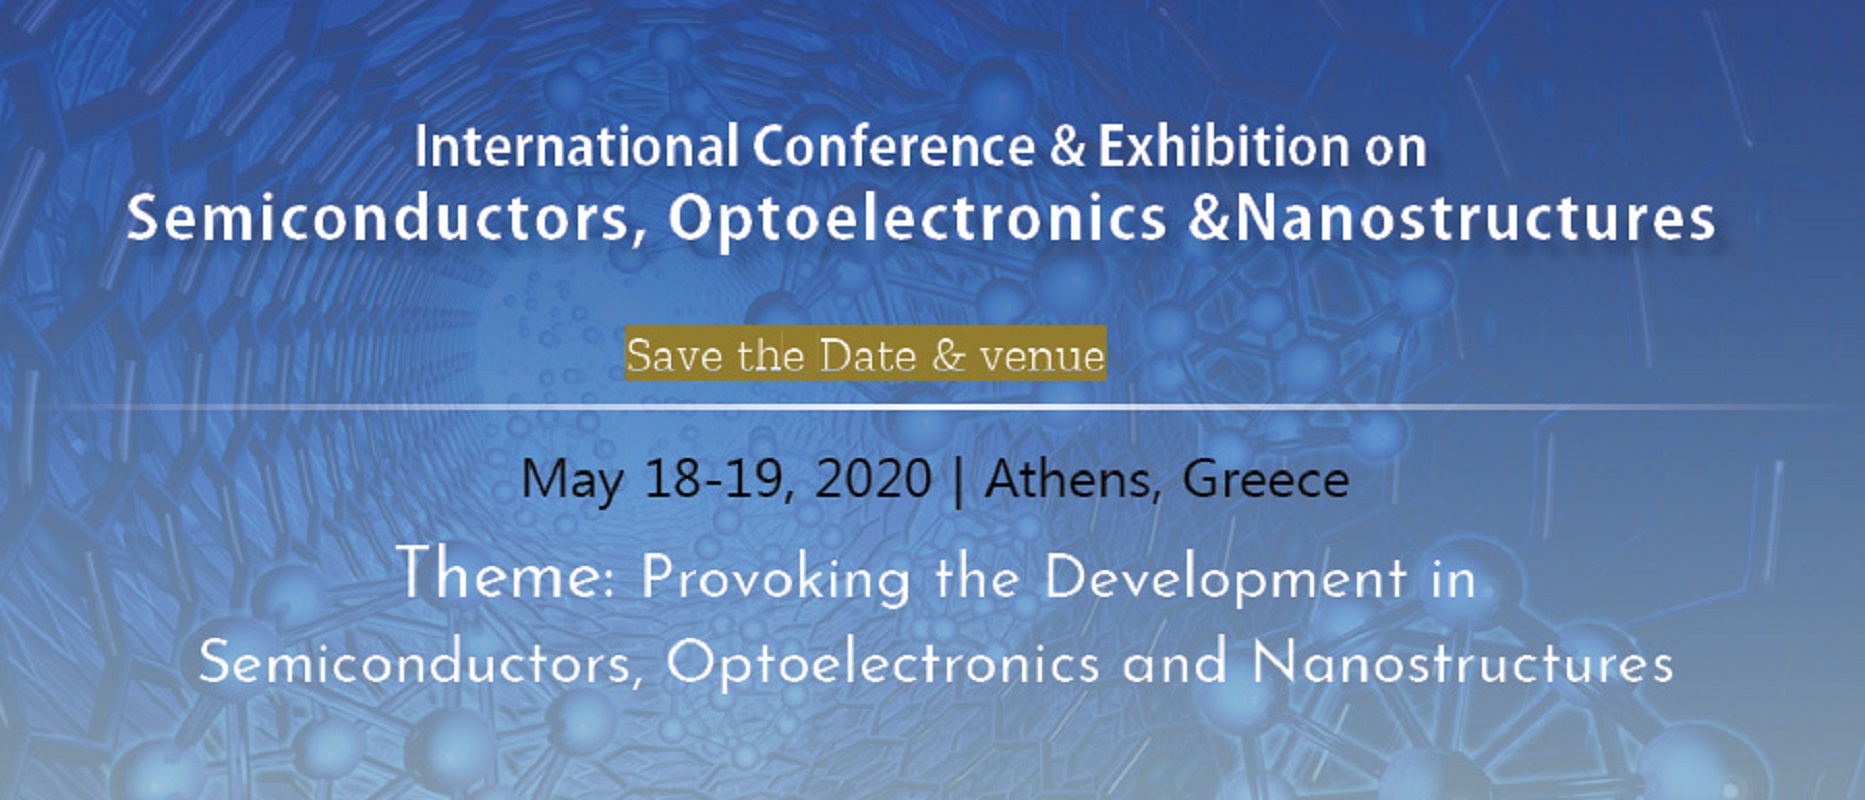 International Conference and Exhibition on Semiconductors, Optoelectronics and Nanostructures